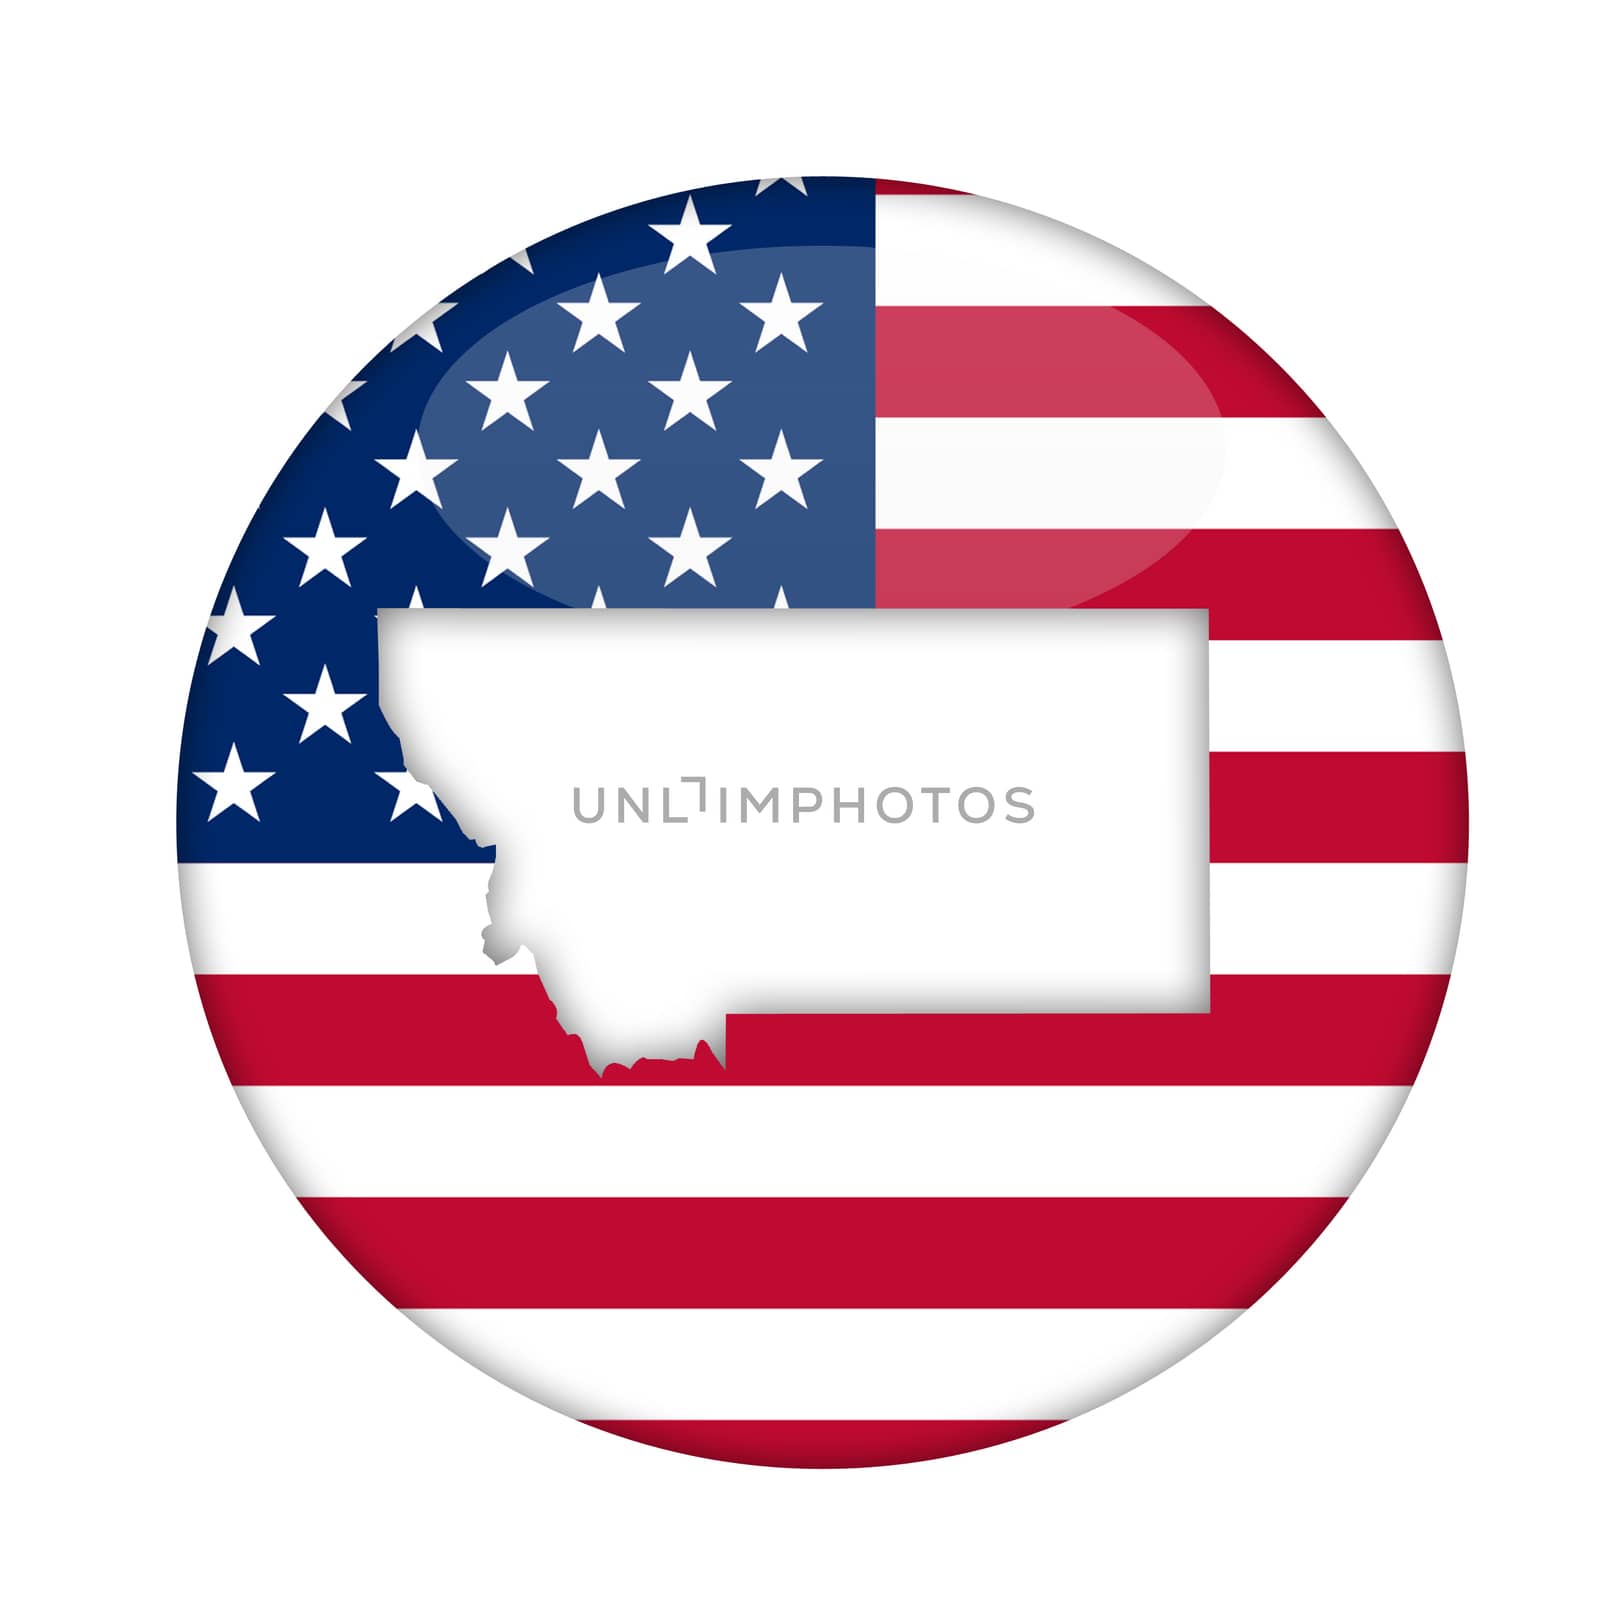 Montana state of America badge by speedfighter